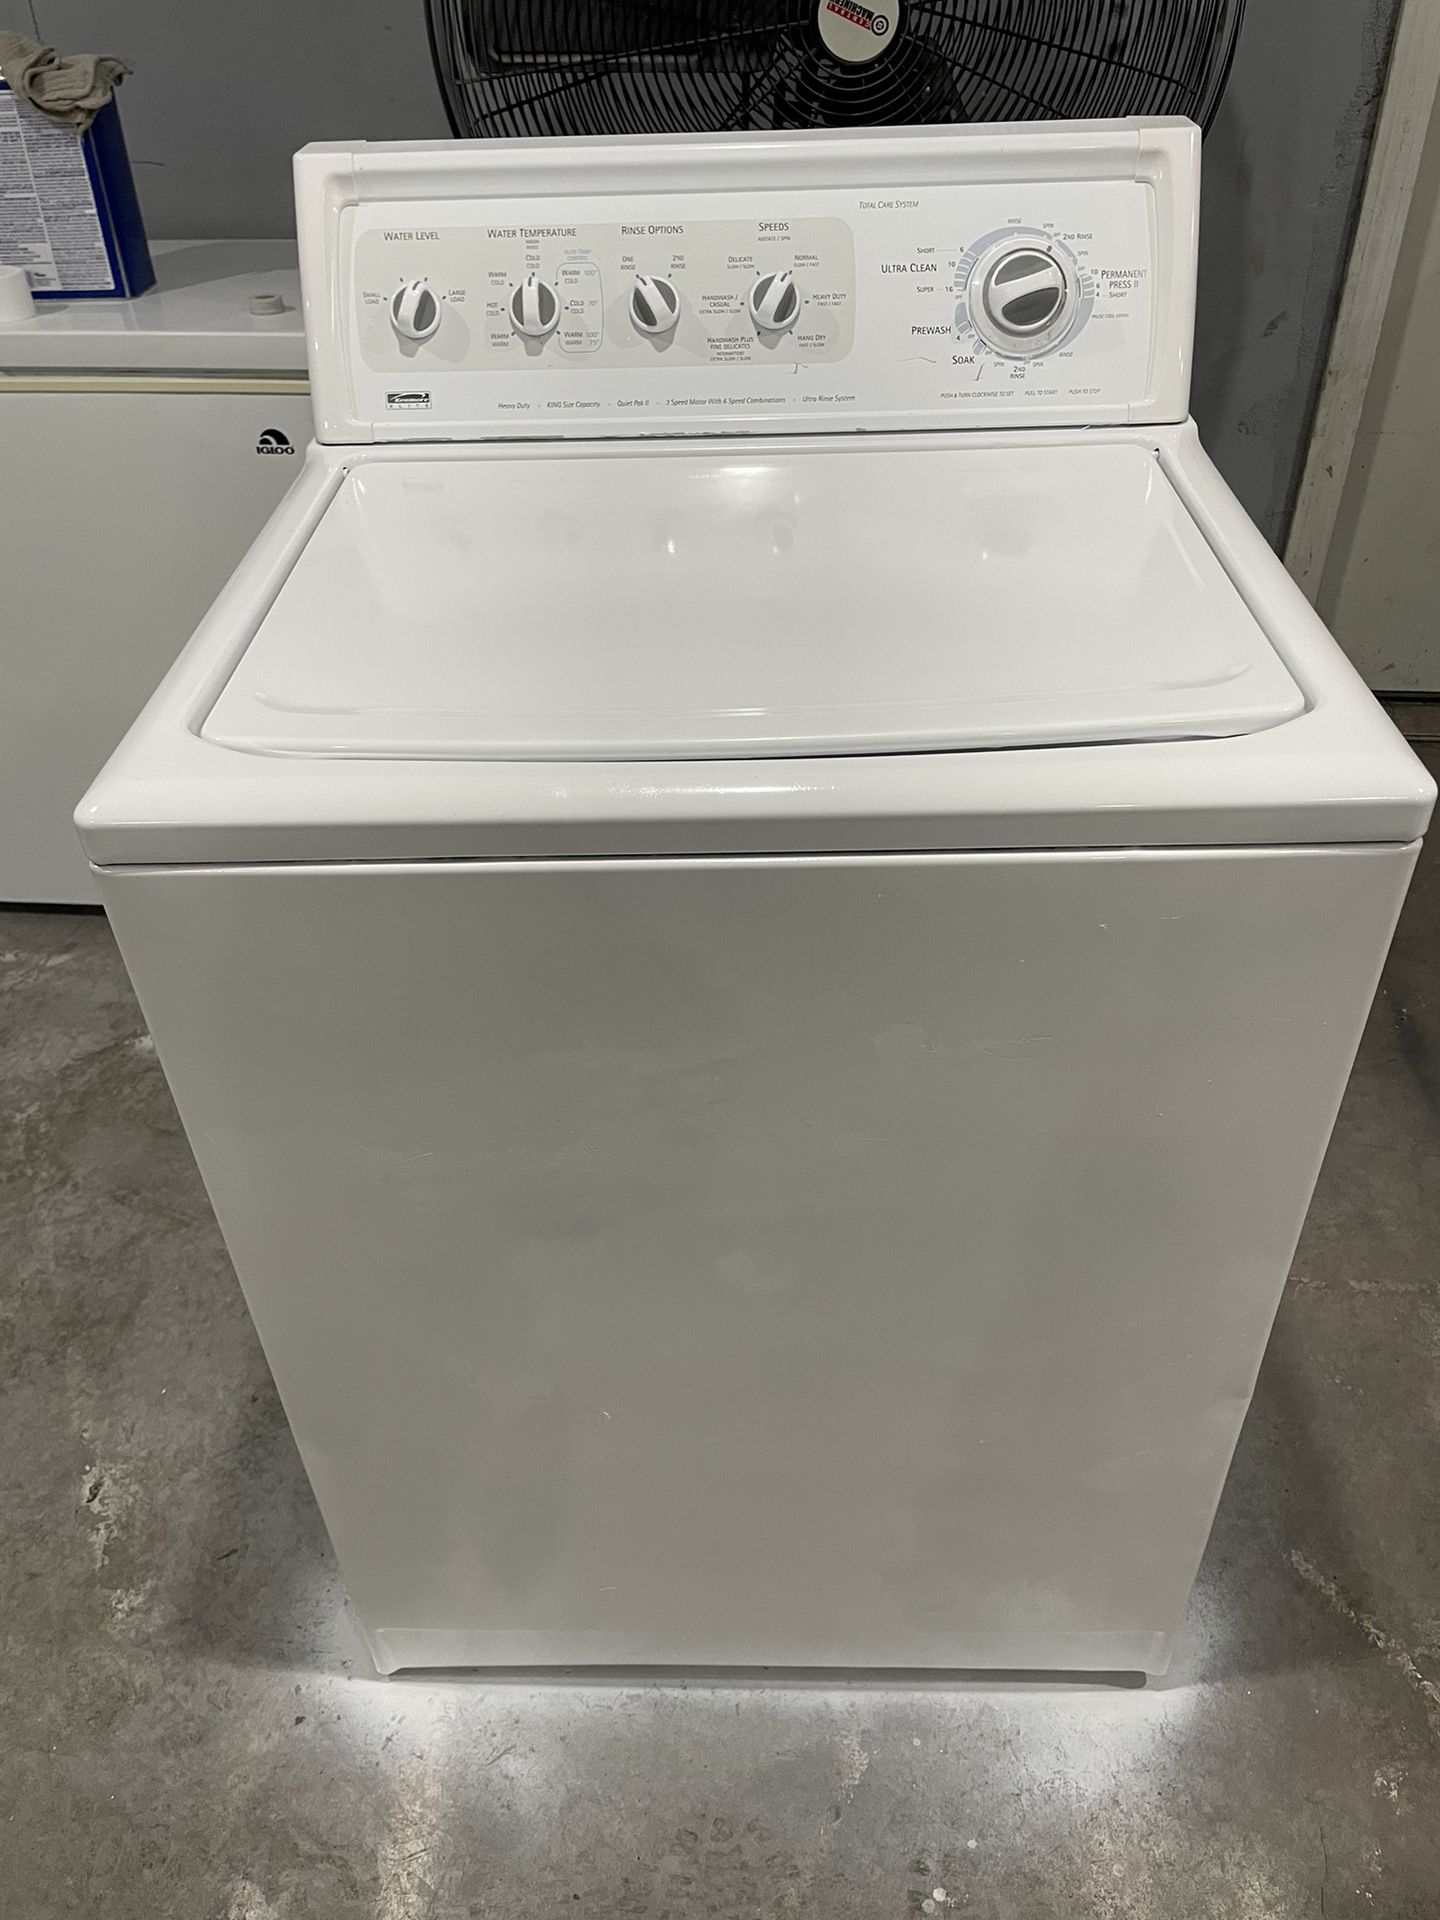 Kenmore washer top-load